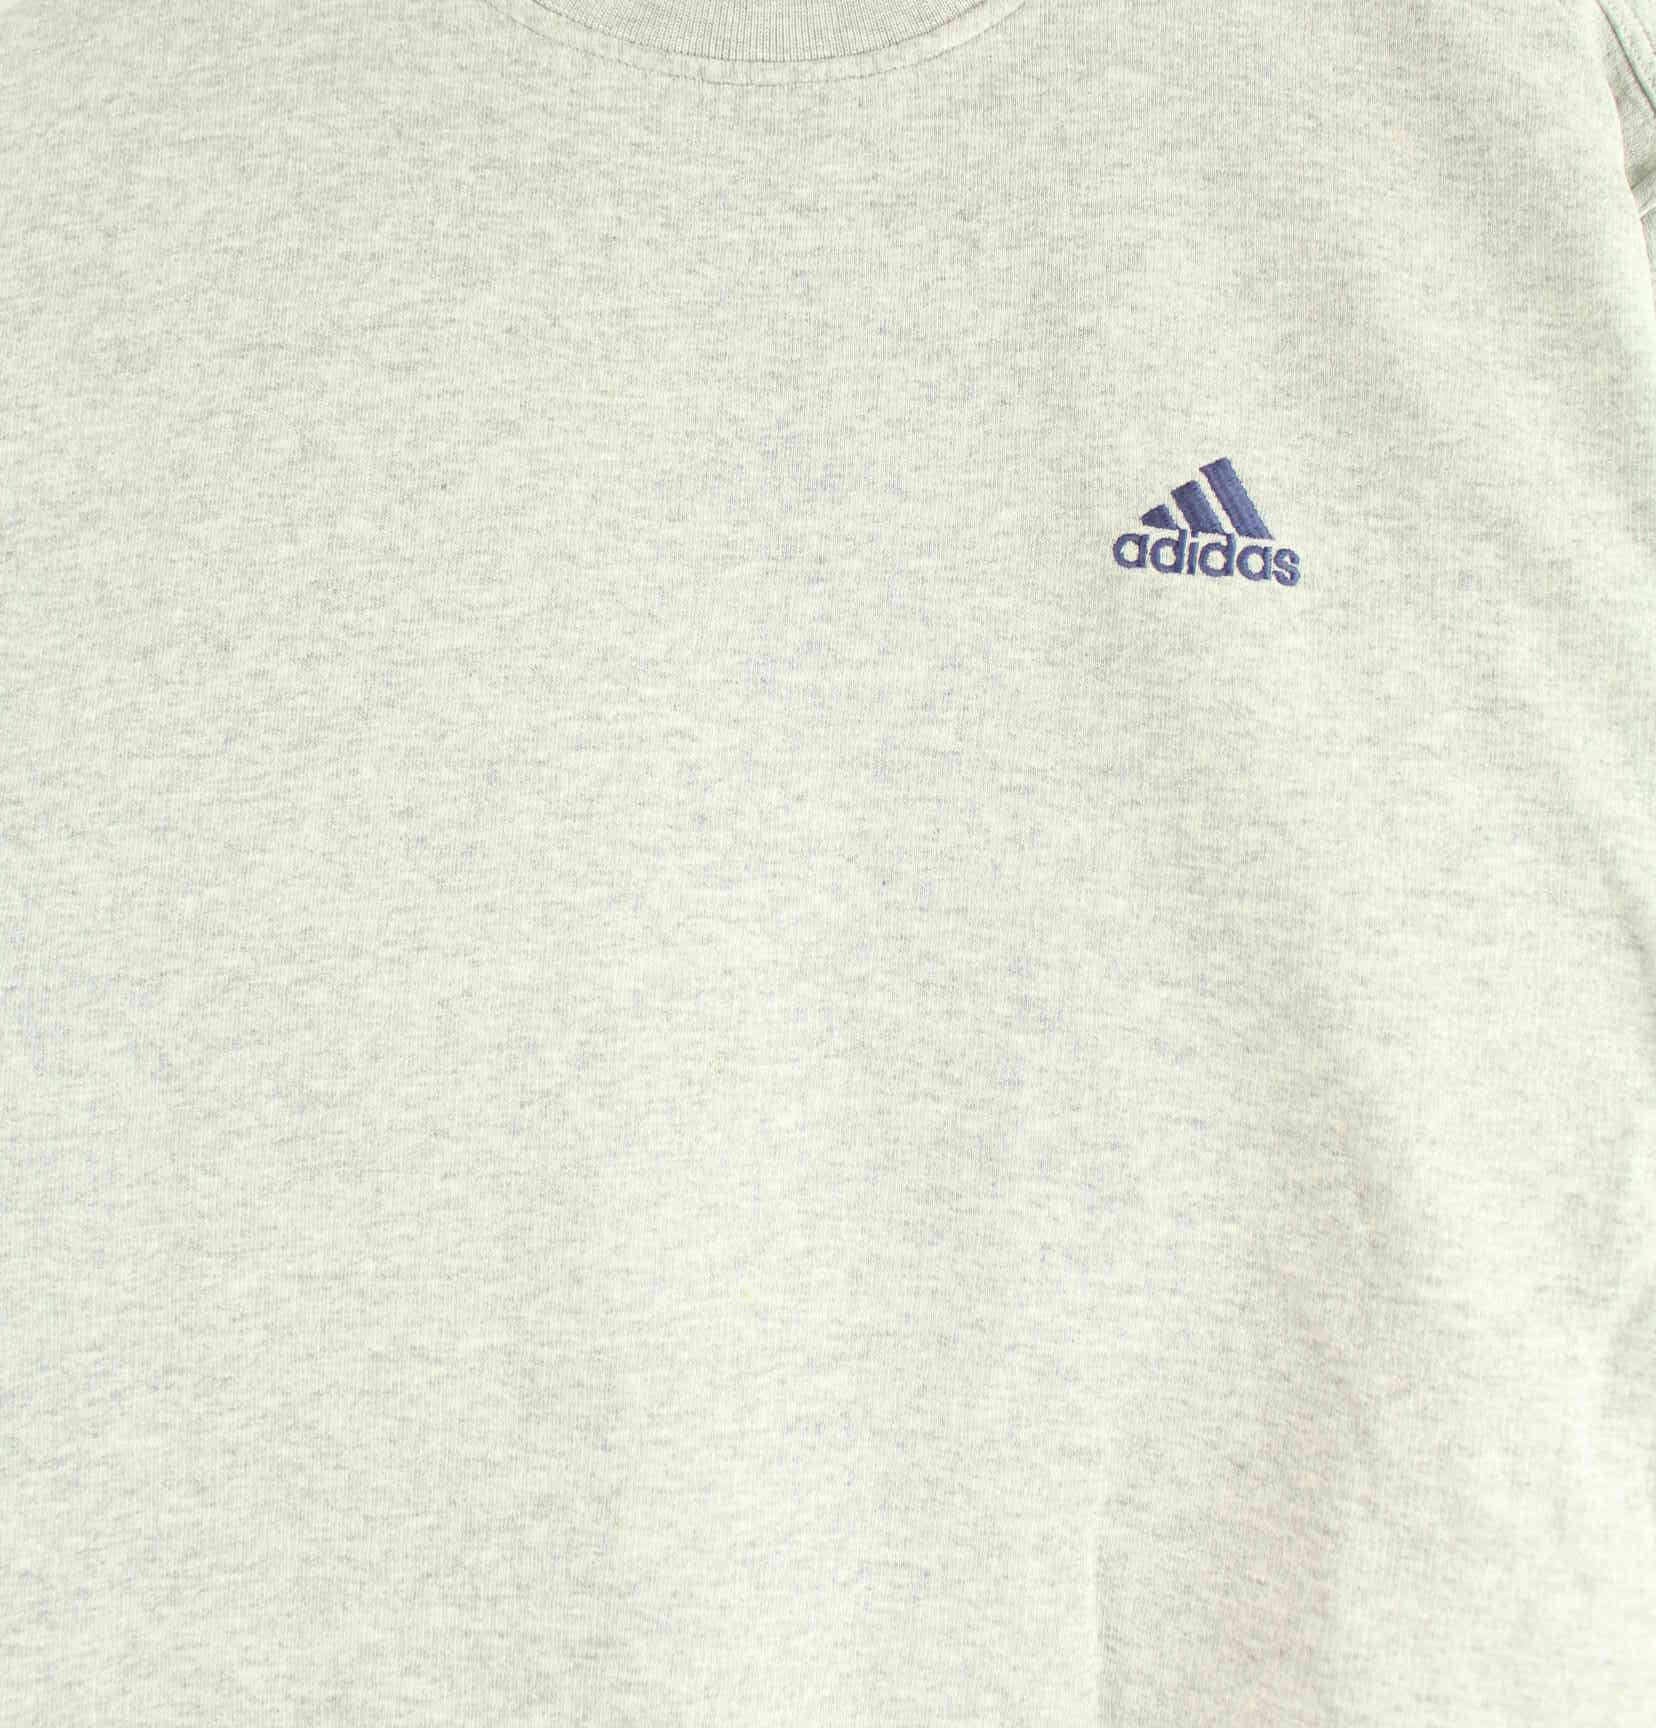 Adidas 90s Vintage Embroidered Sweater Grau S (detail image 1)